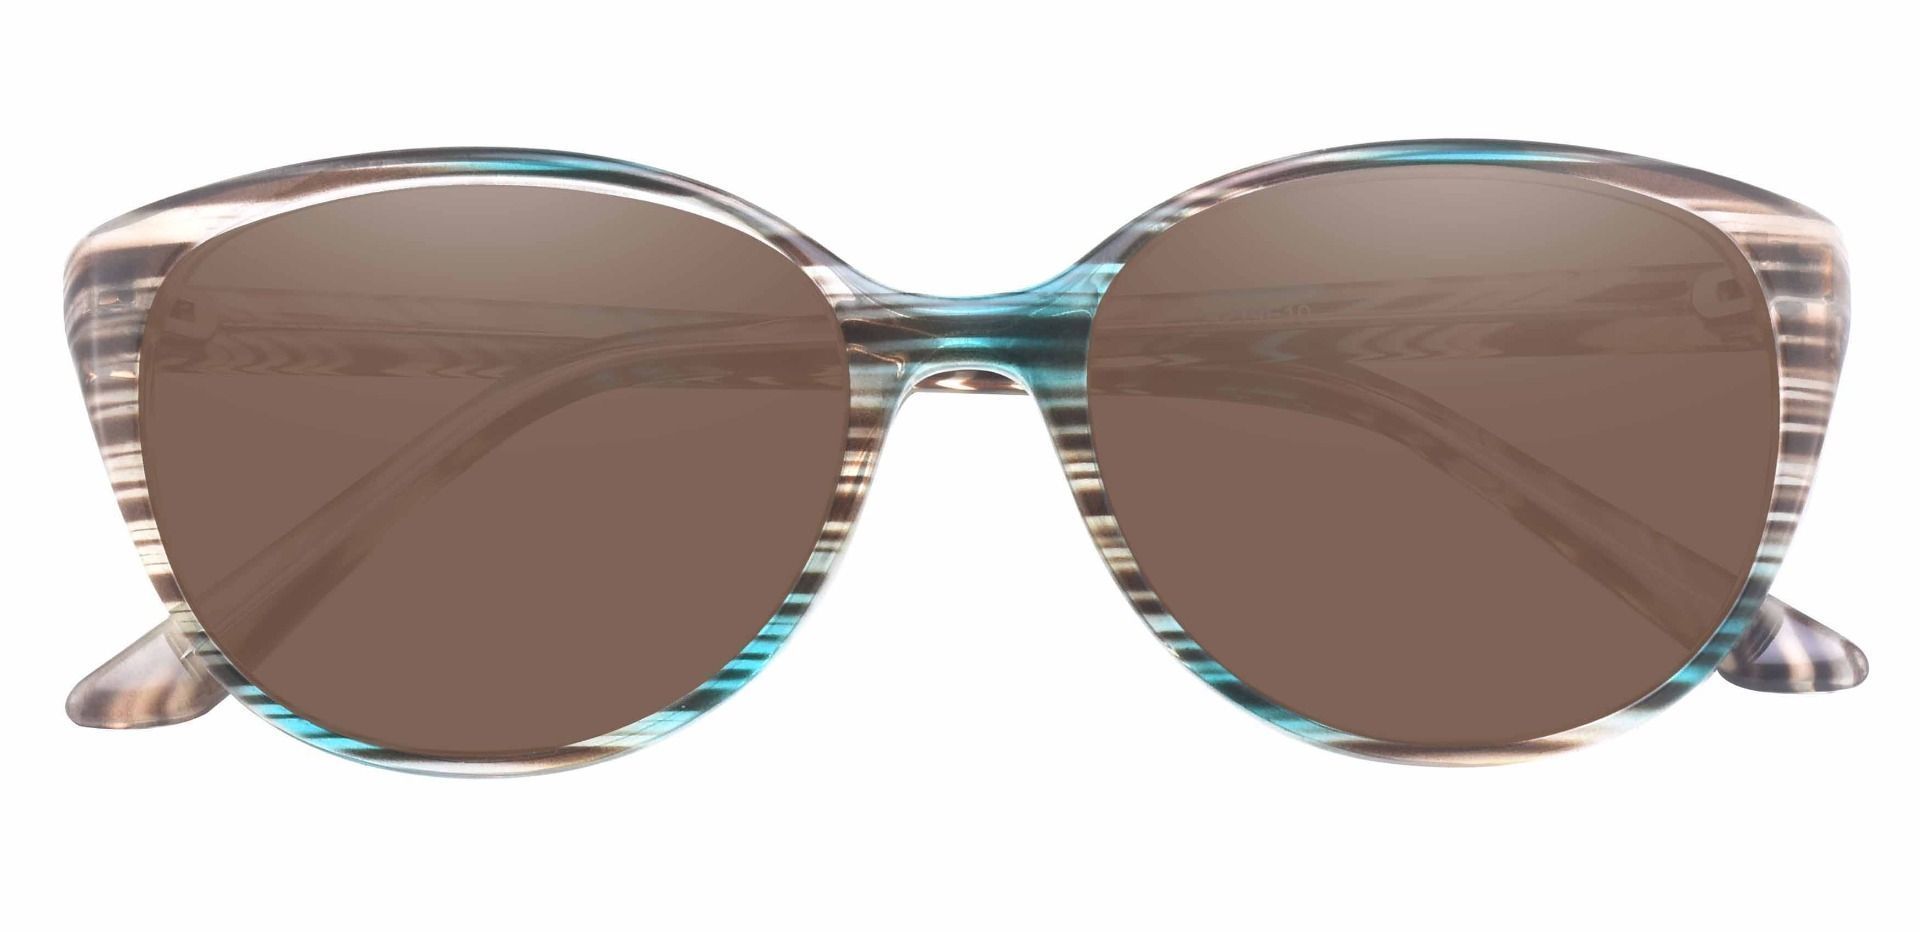 Polly Oval Prescription Sunglasses - Green Frame With Brown Lenses